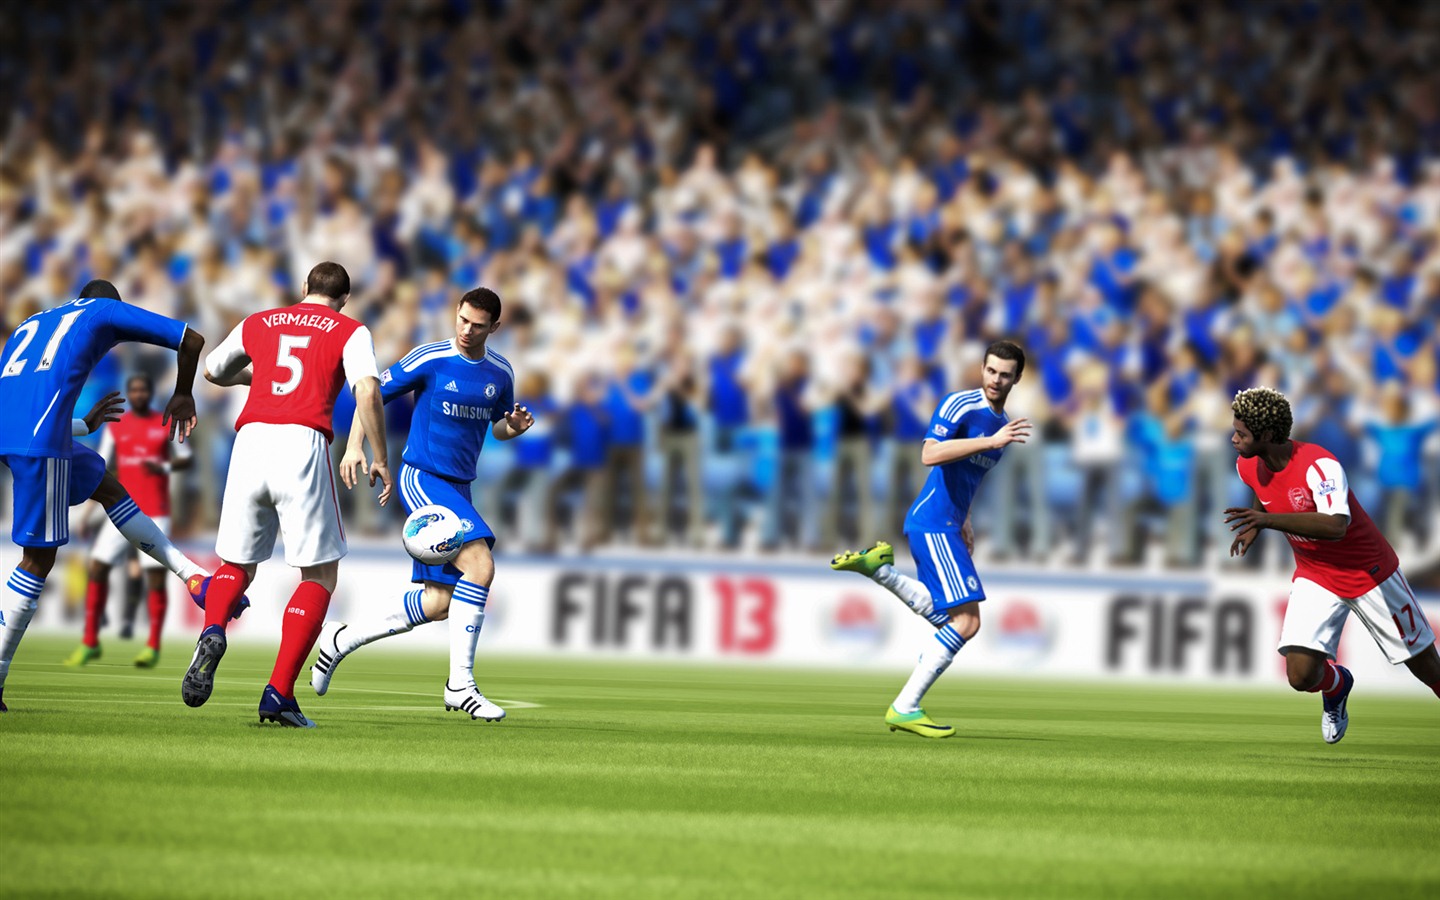 FIFA 13 game HD wallpapers #13 - 1440x900